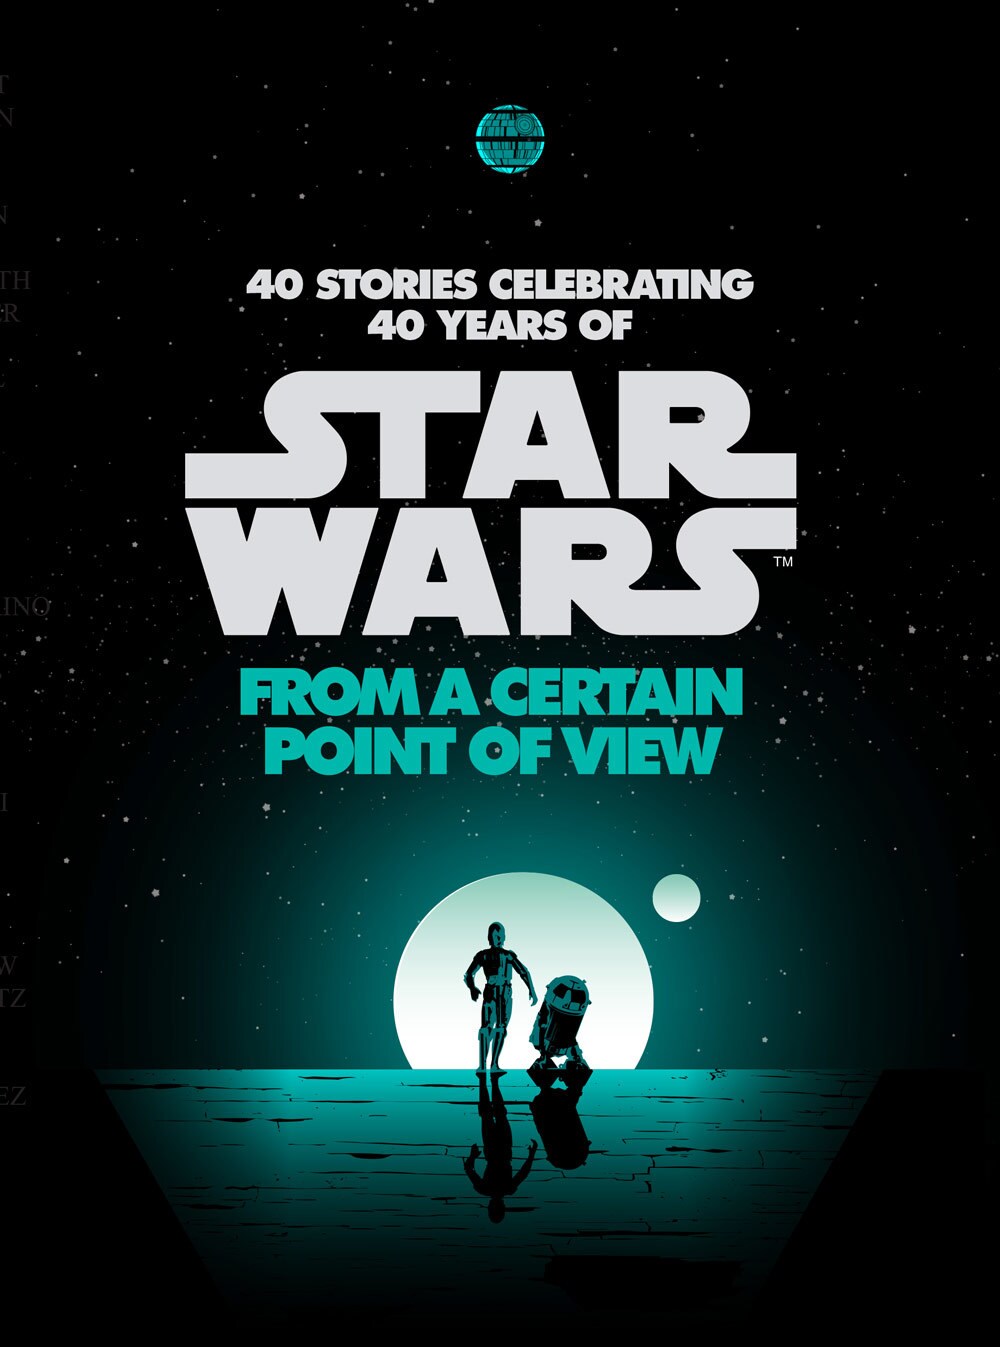 Cover art for the Star Wars anthology book From a Certain Point of View depicts C-3PO and R2-D2 in front of a moon.